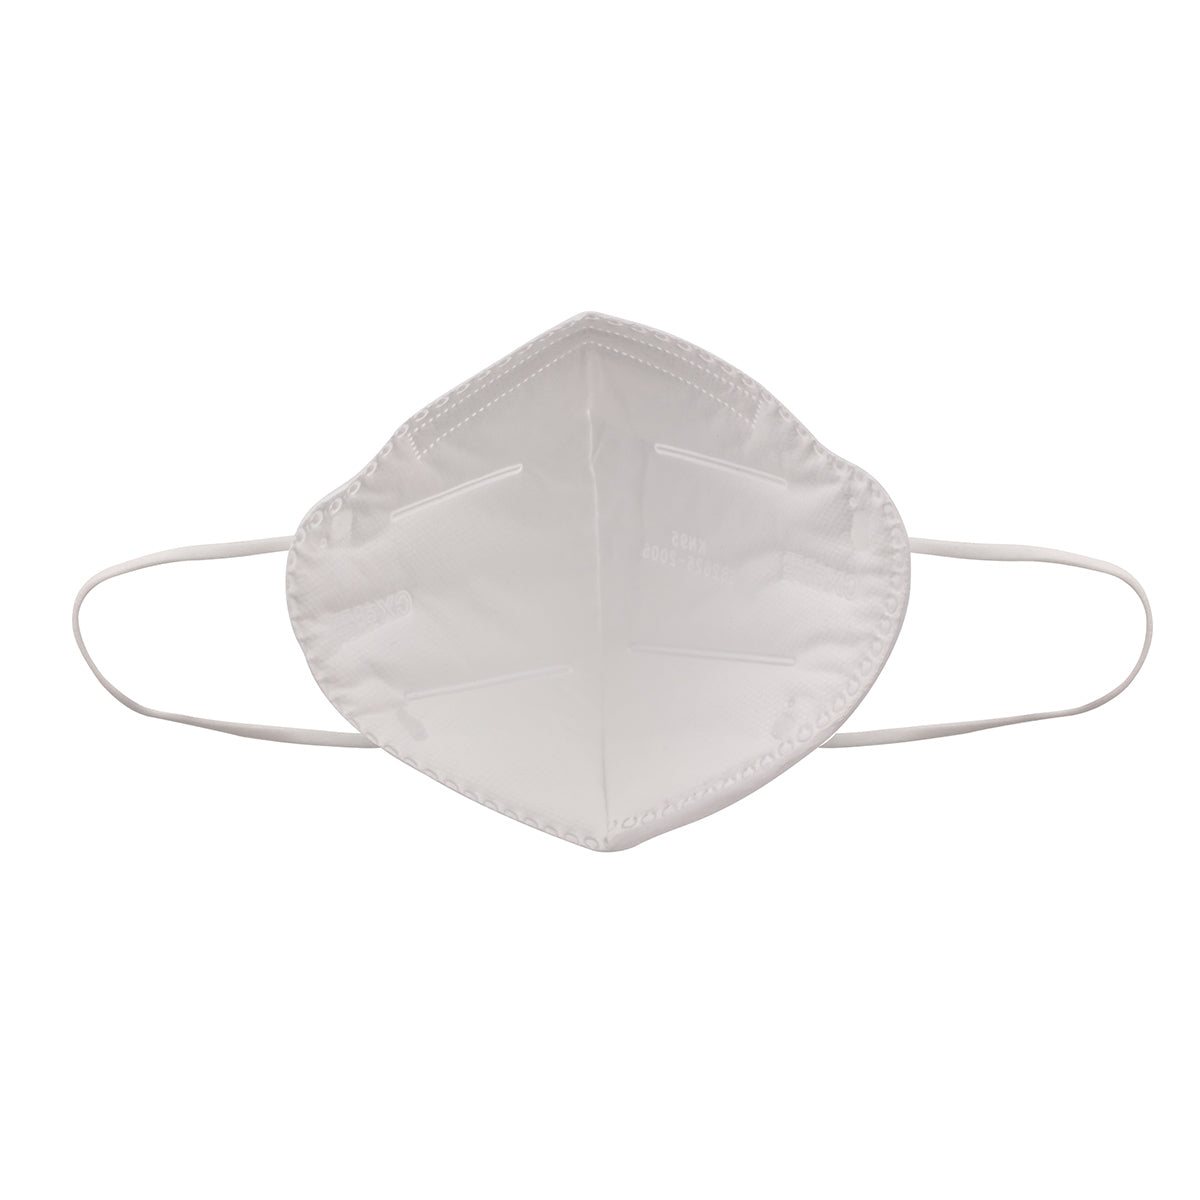 2Pcs KN95 4-Layer Face Masks Self-priming Filter Respirator Breathable Protective Dust Filter Mask